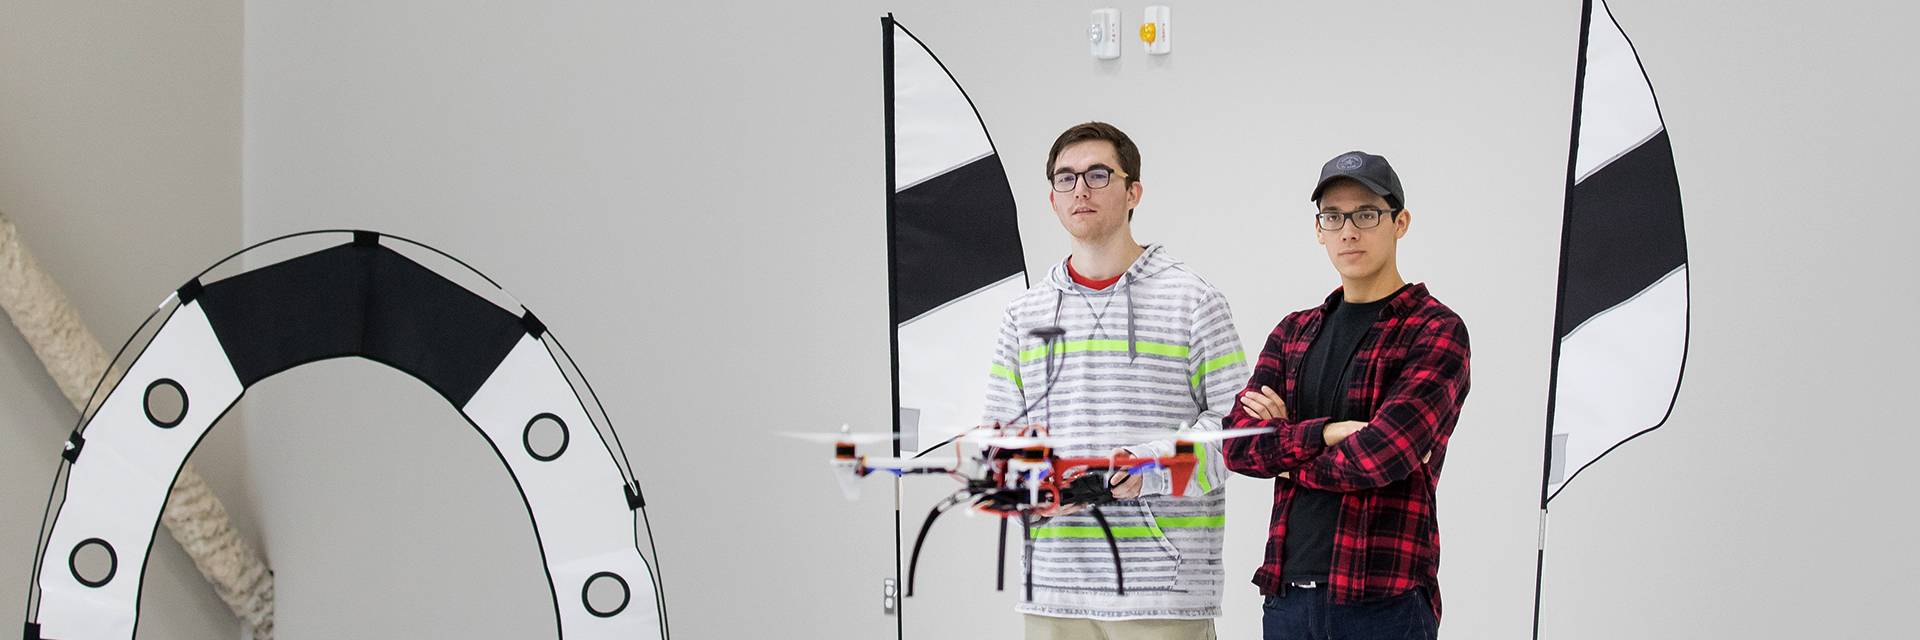 two unmanned aircraft system operations students controlling drone in race